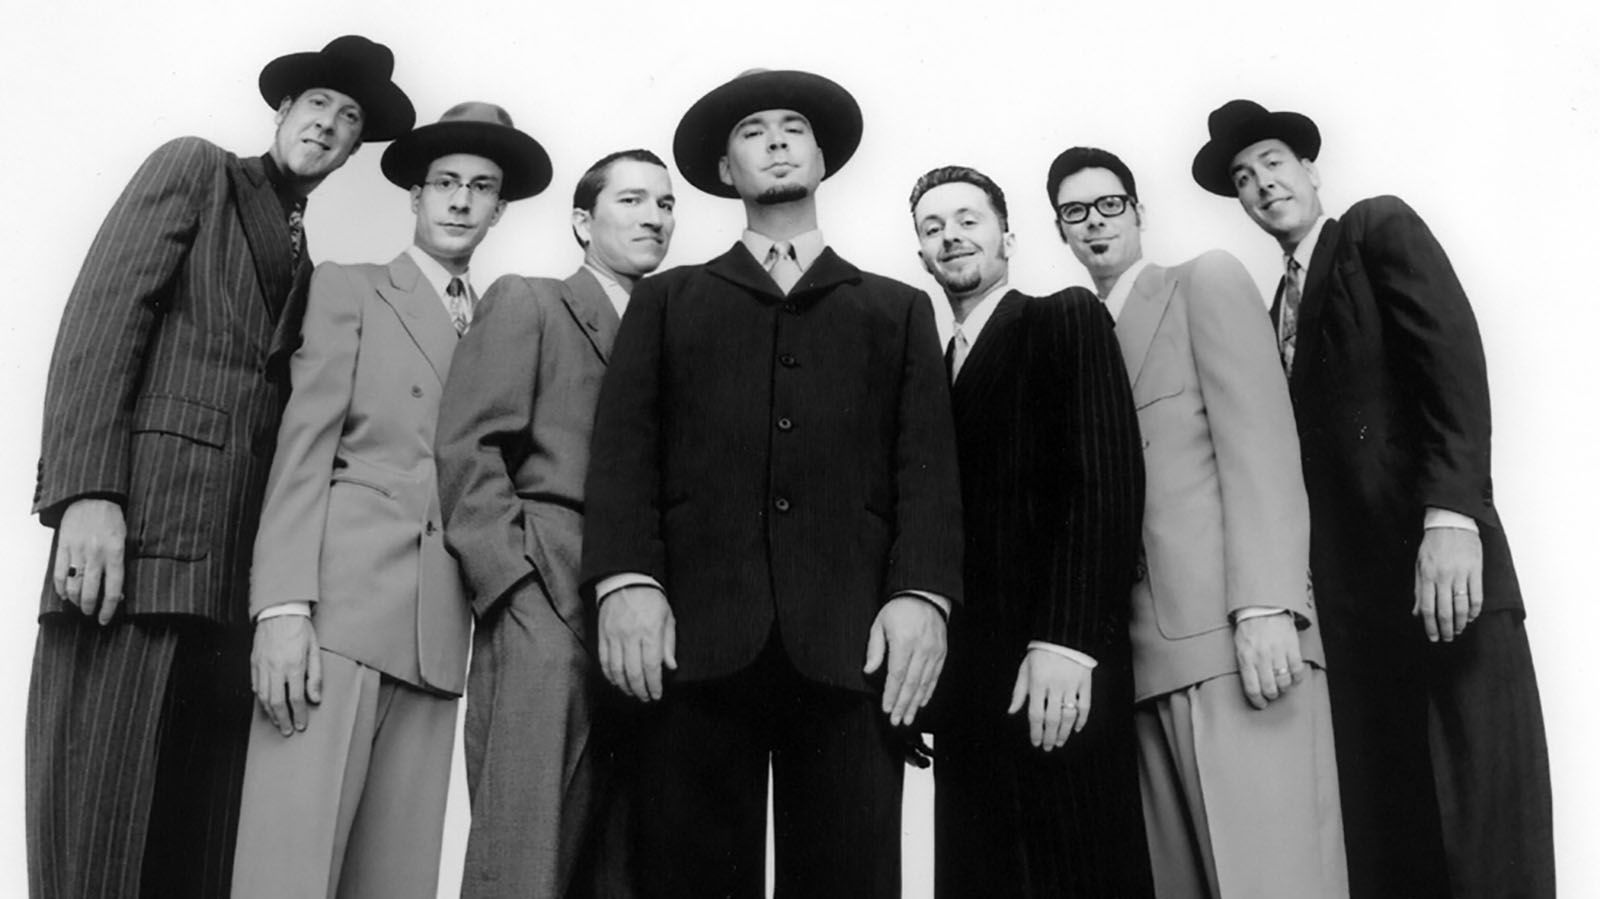 Big Bad Voodoo Daddy will be at The Clyde Theatre on Friday, Sept. 22.